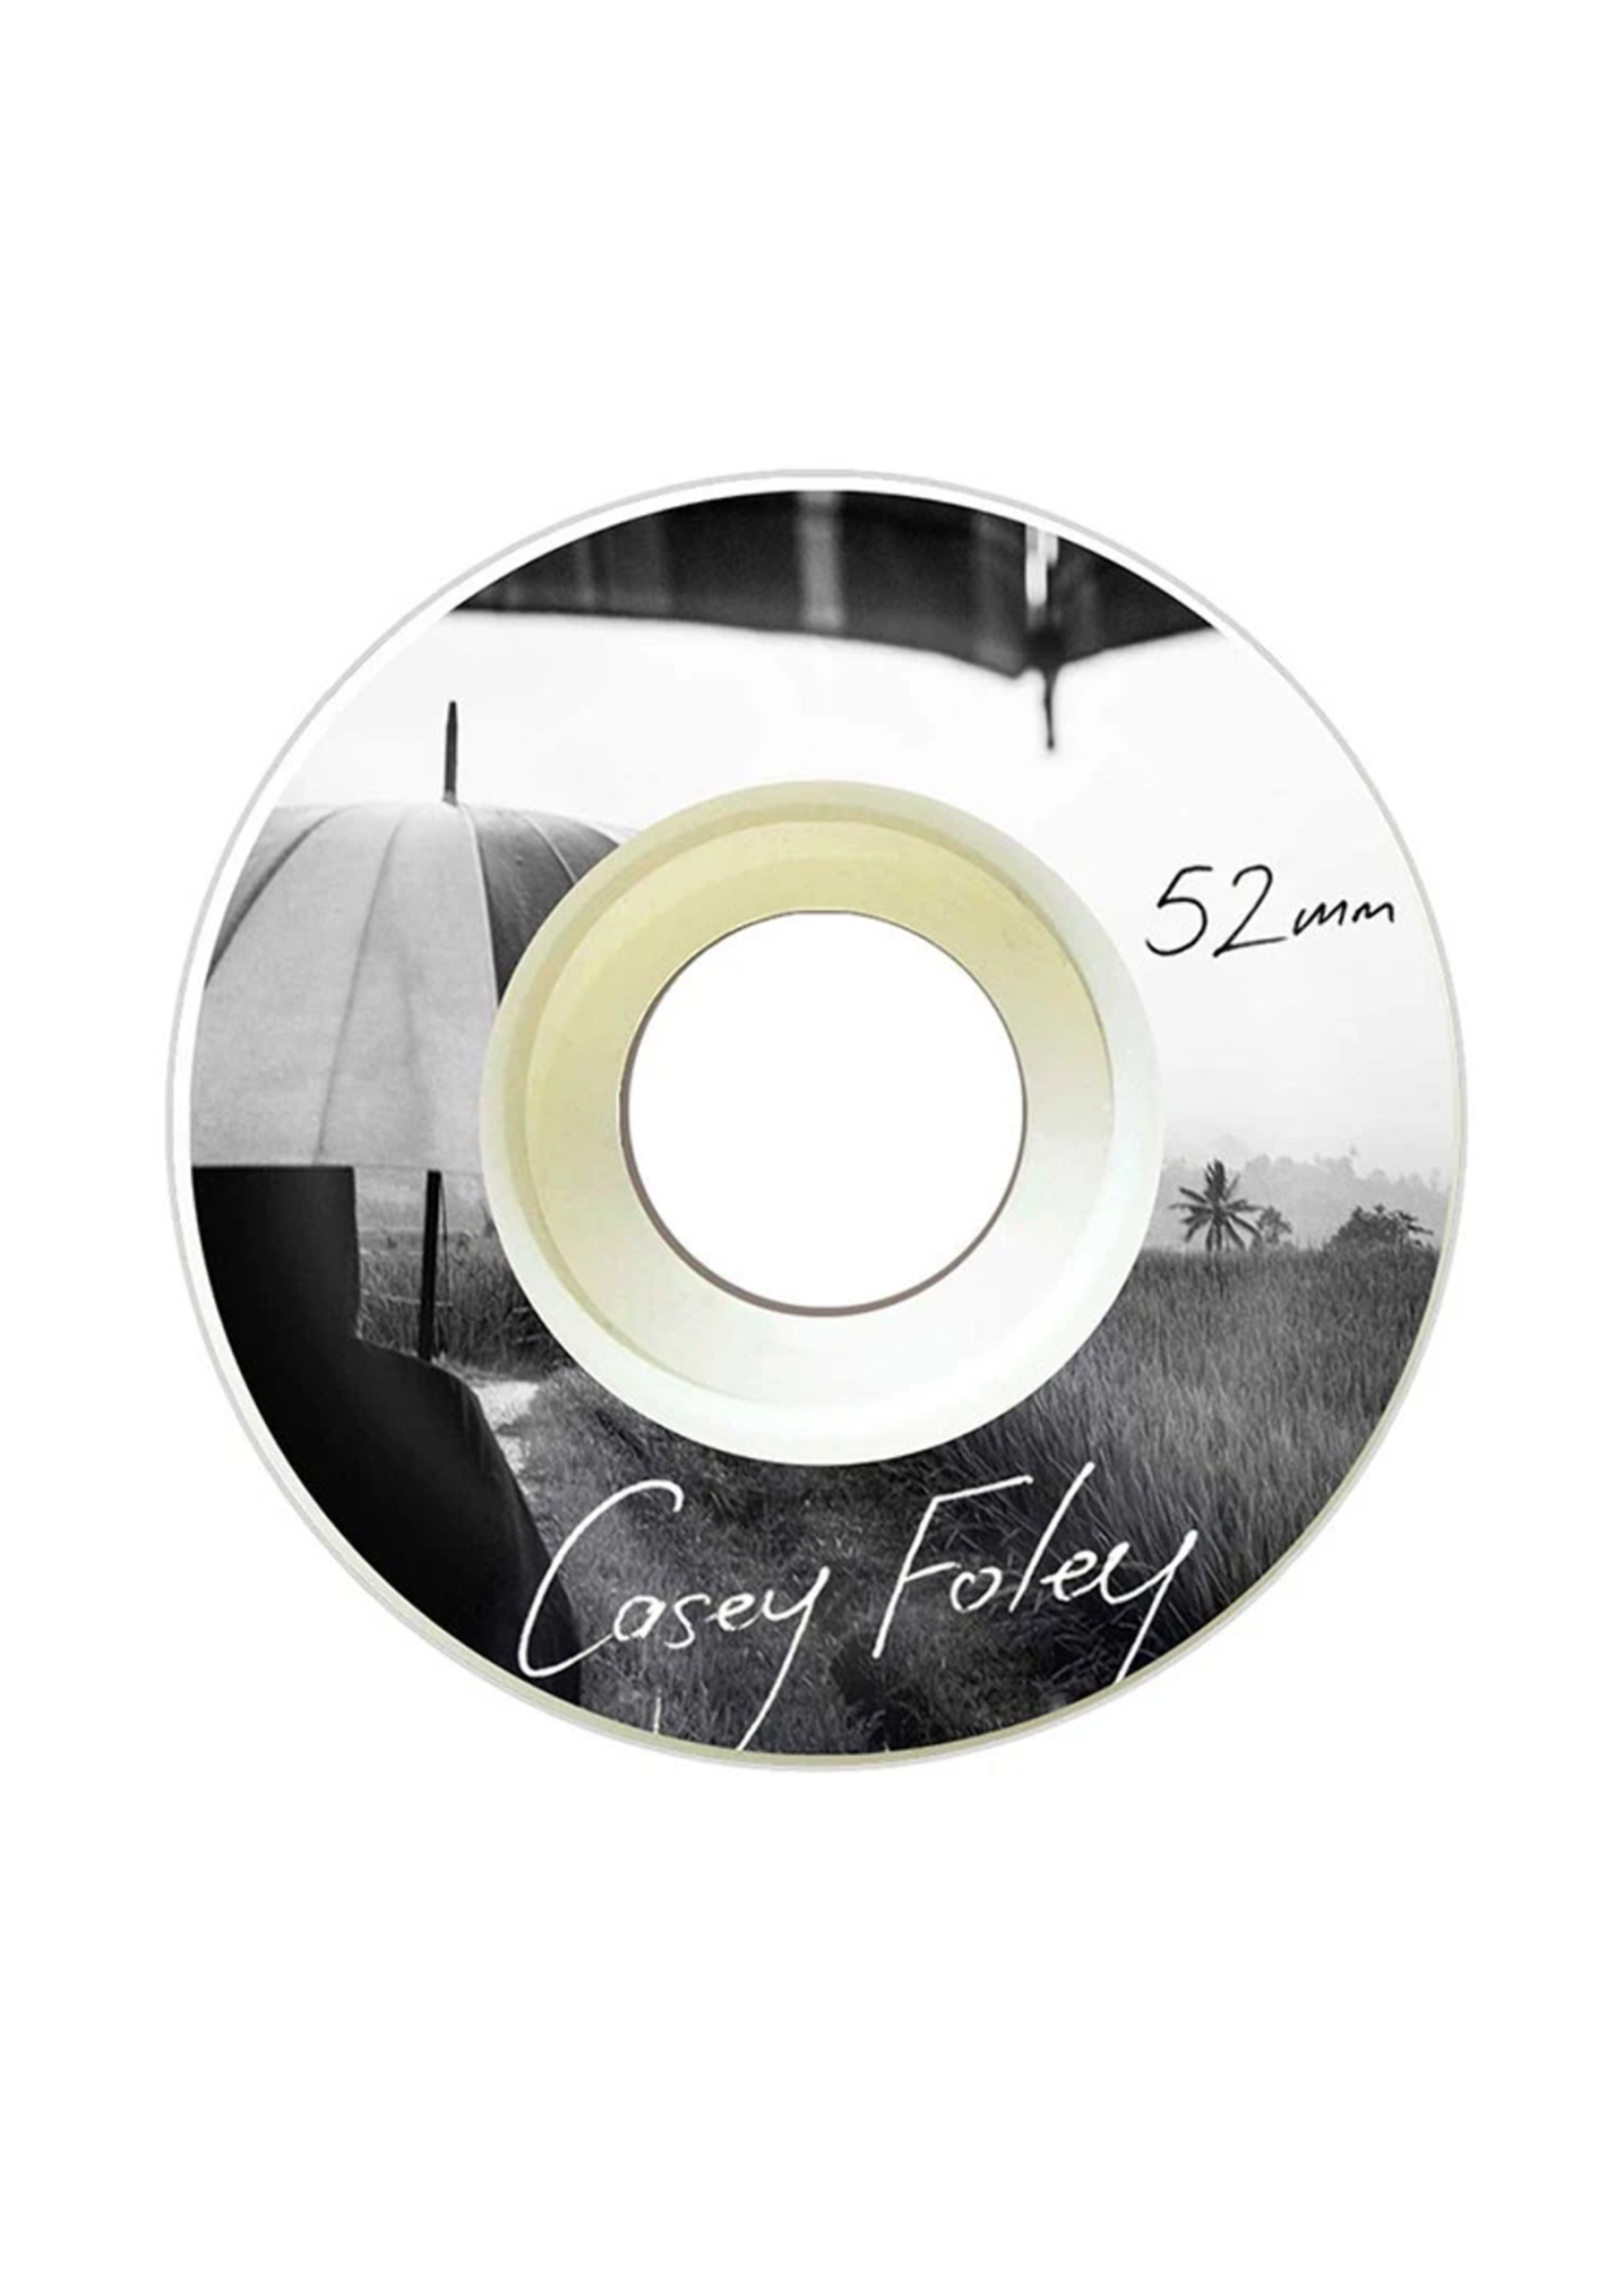 Picture Wheel Co. PICTURE WHEELS - Casey Foley Signature Pro - 101a  52mm